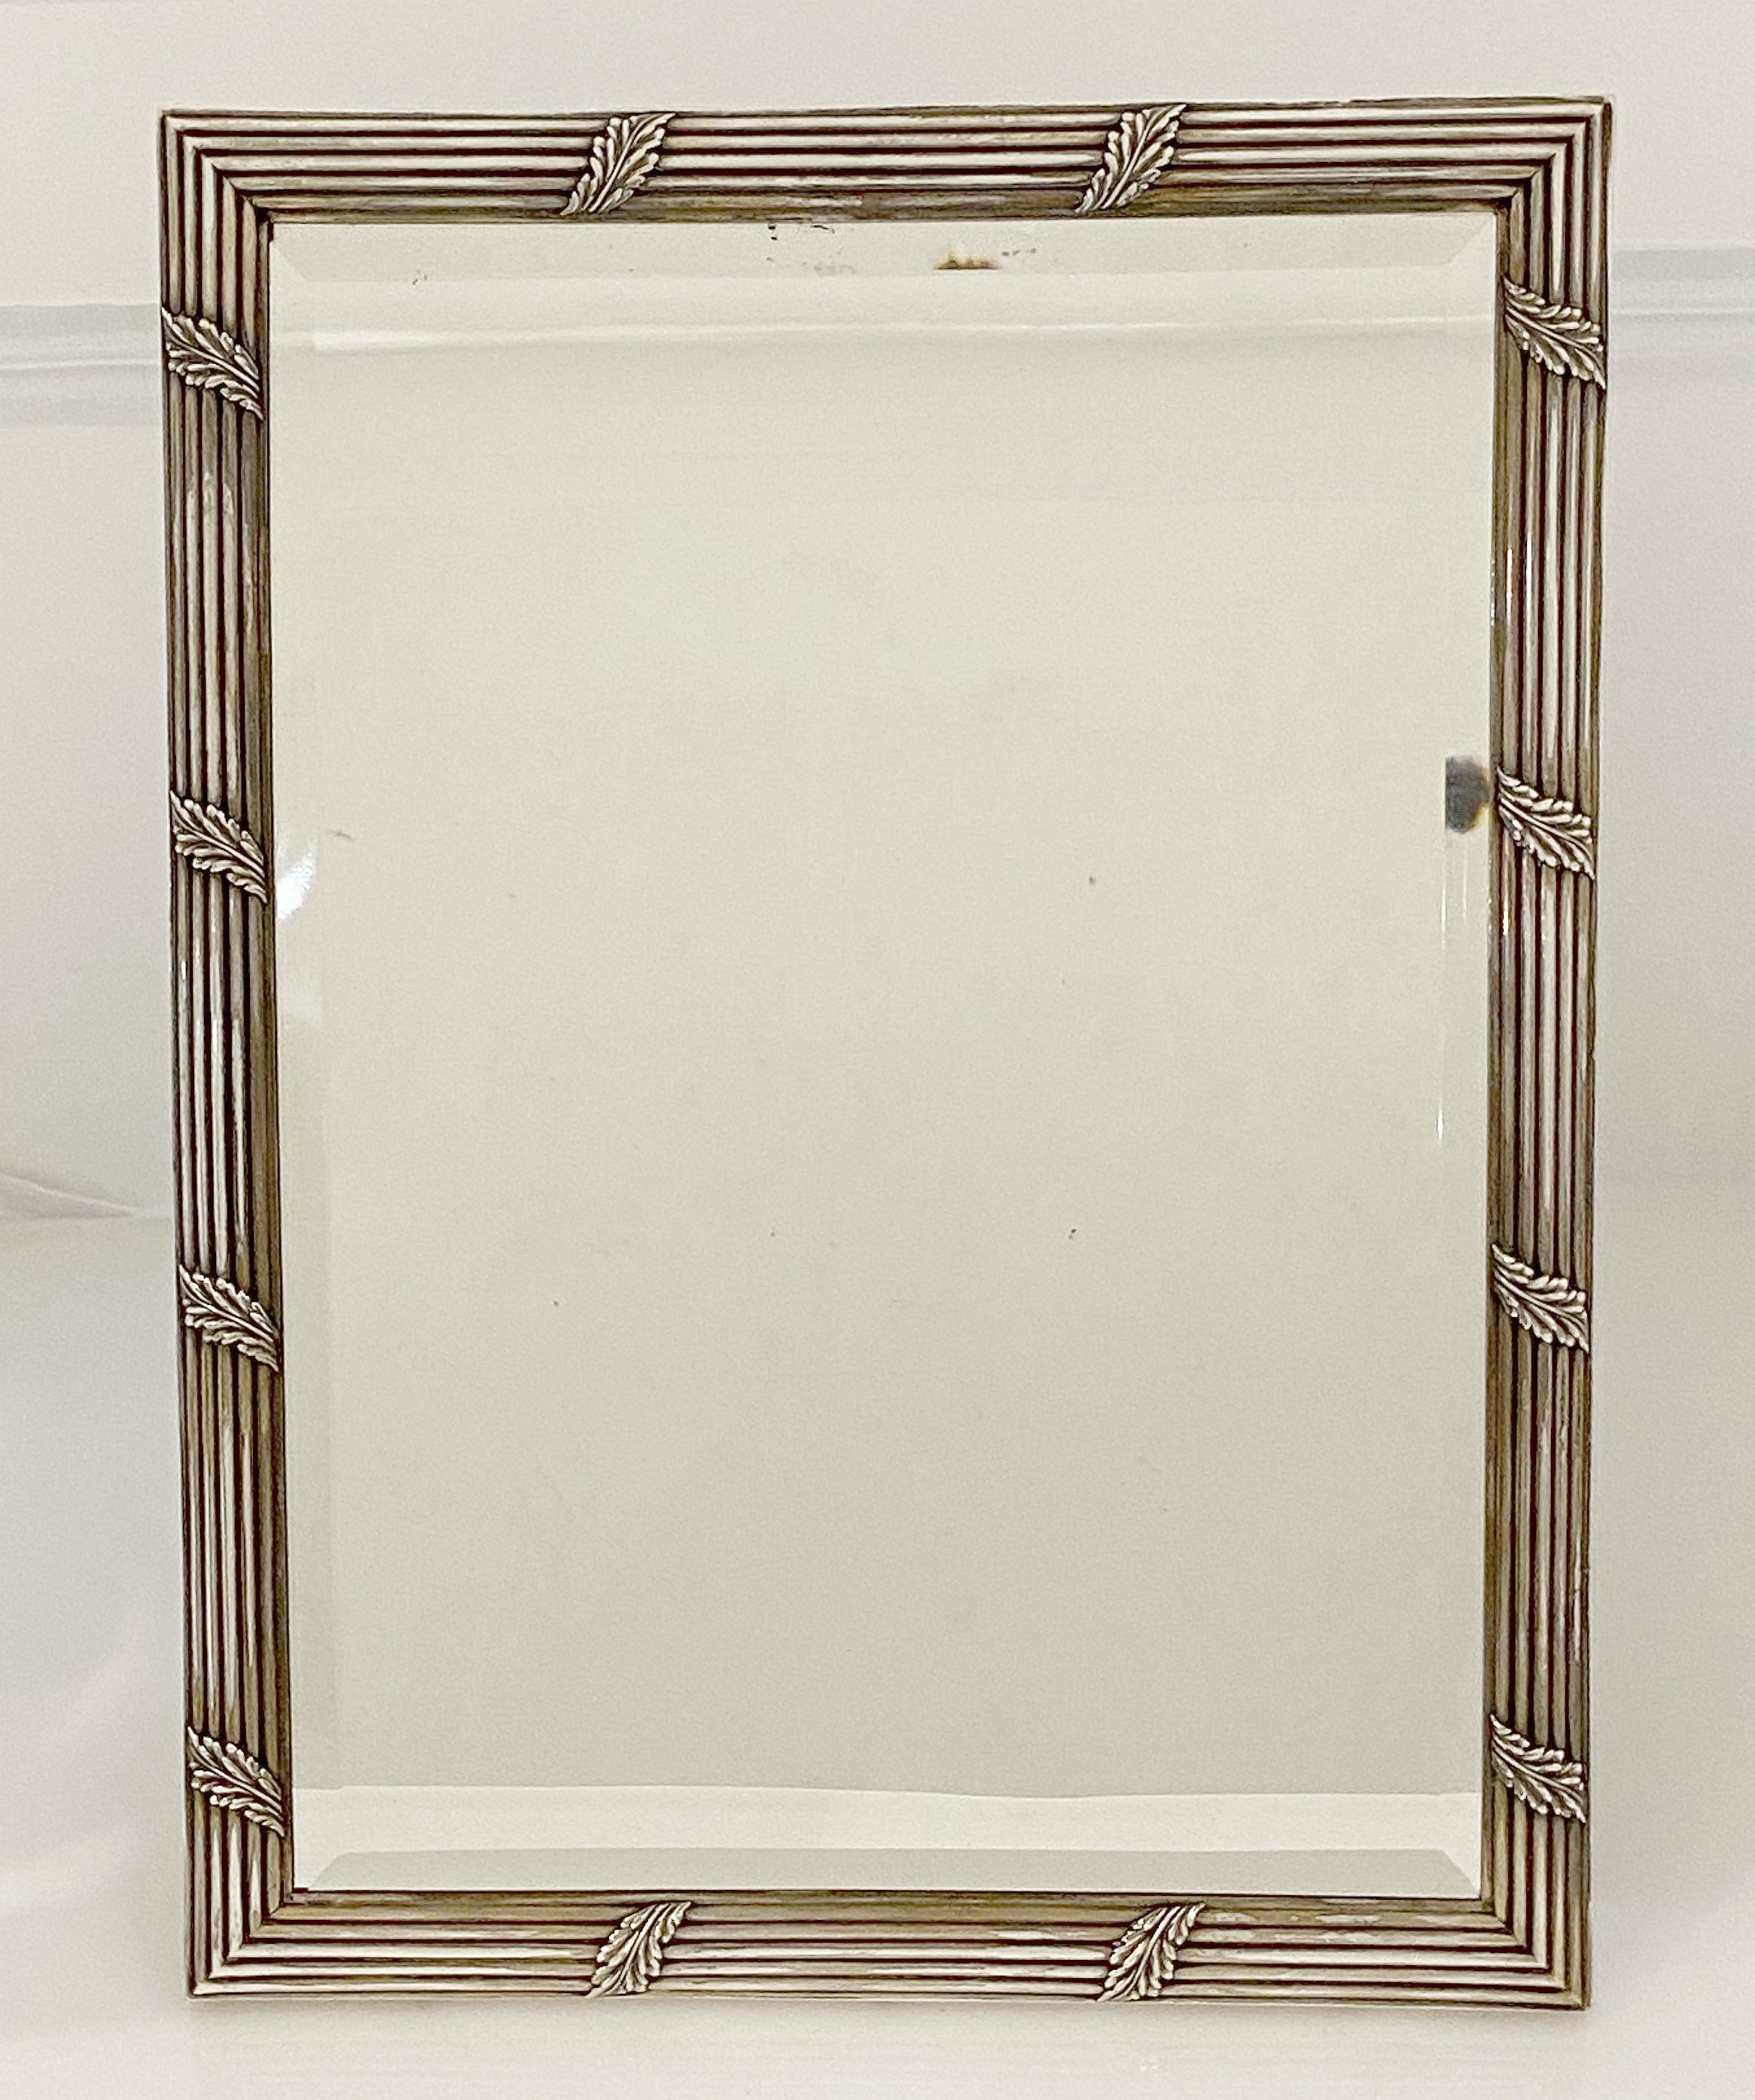 French Silver Vanity or Standing Table Mirror with Beveled Glass In Good Condition For Sale In Austin, TX